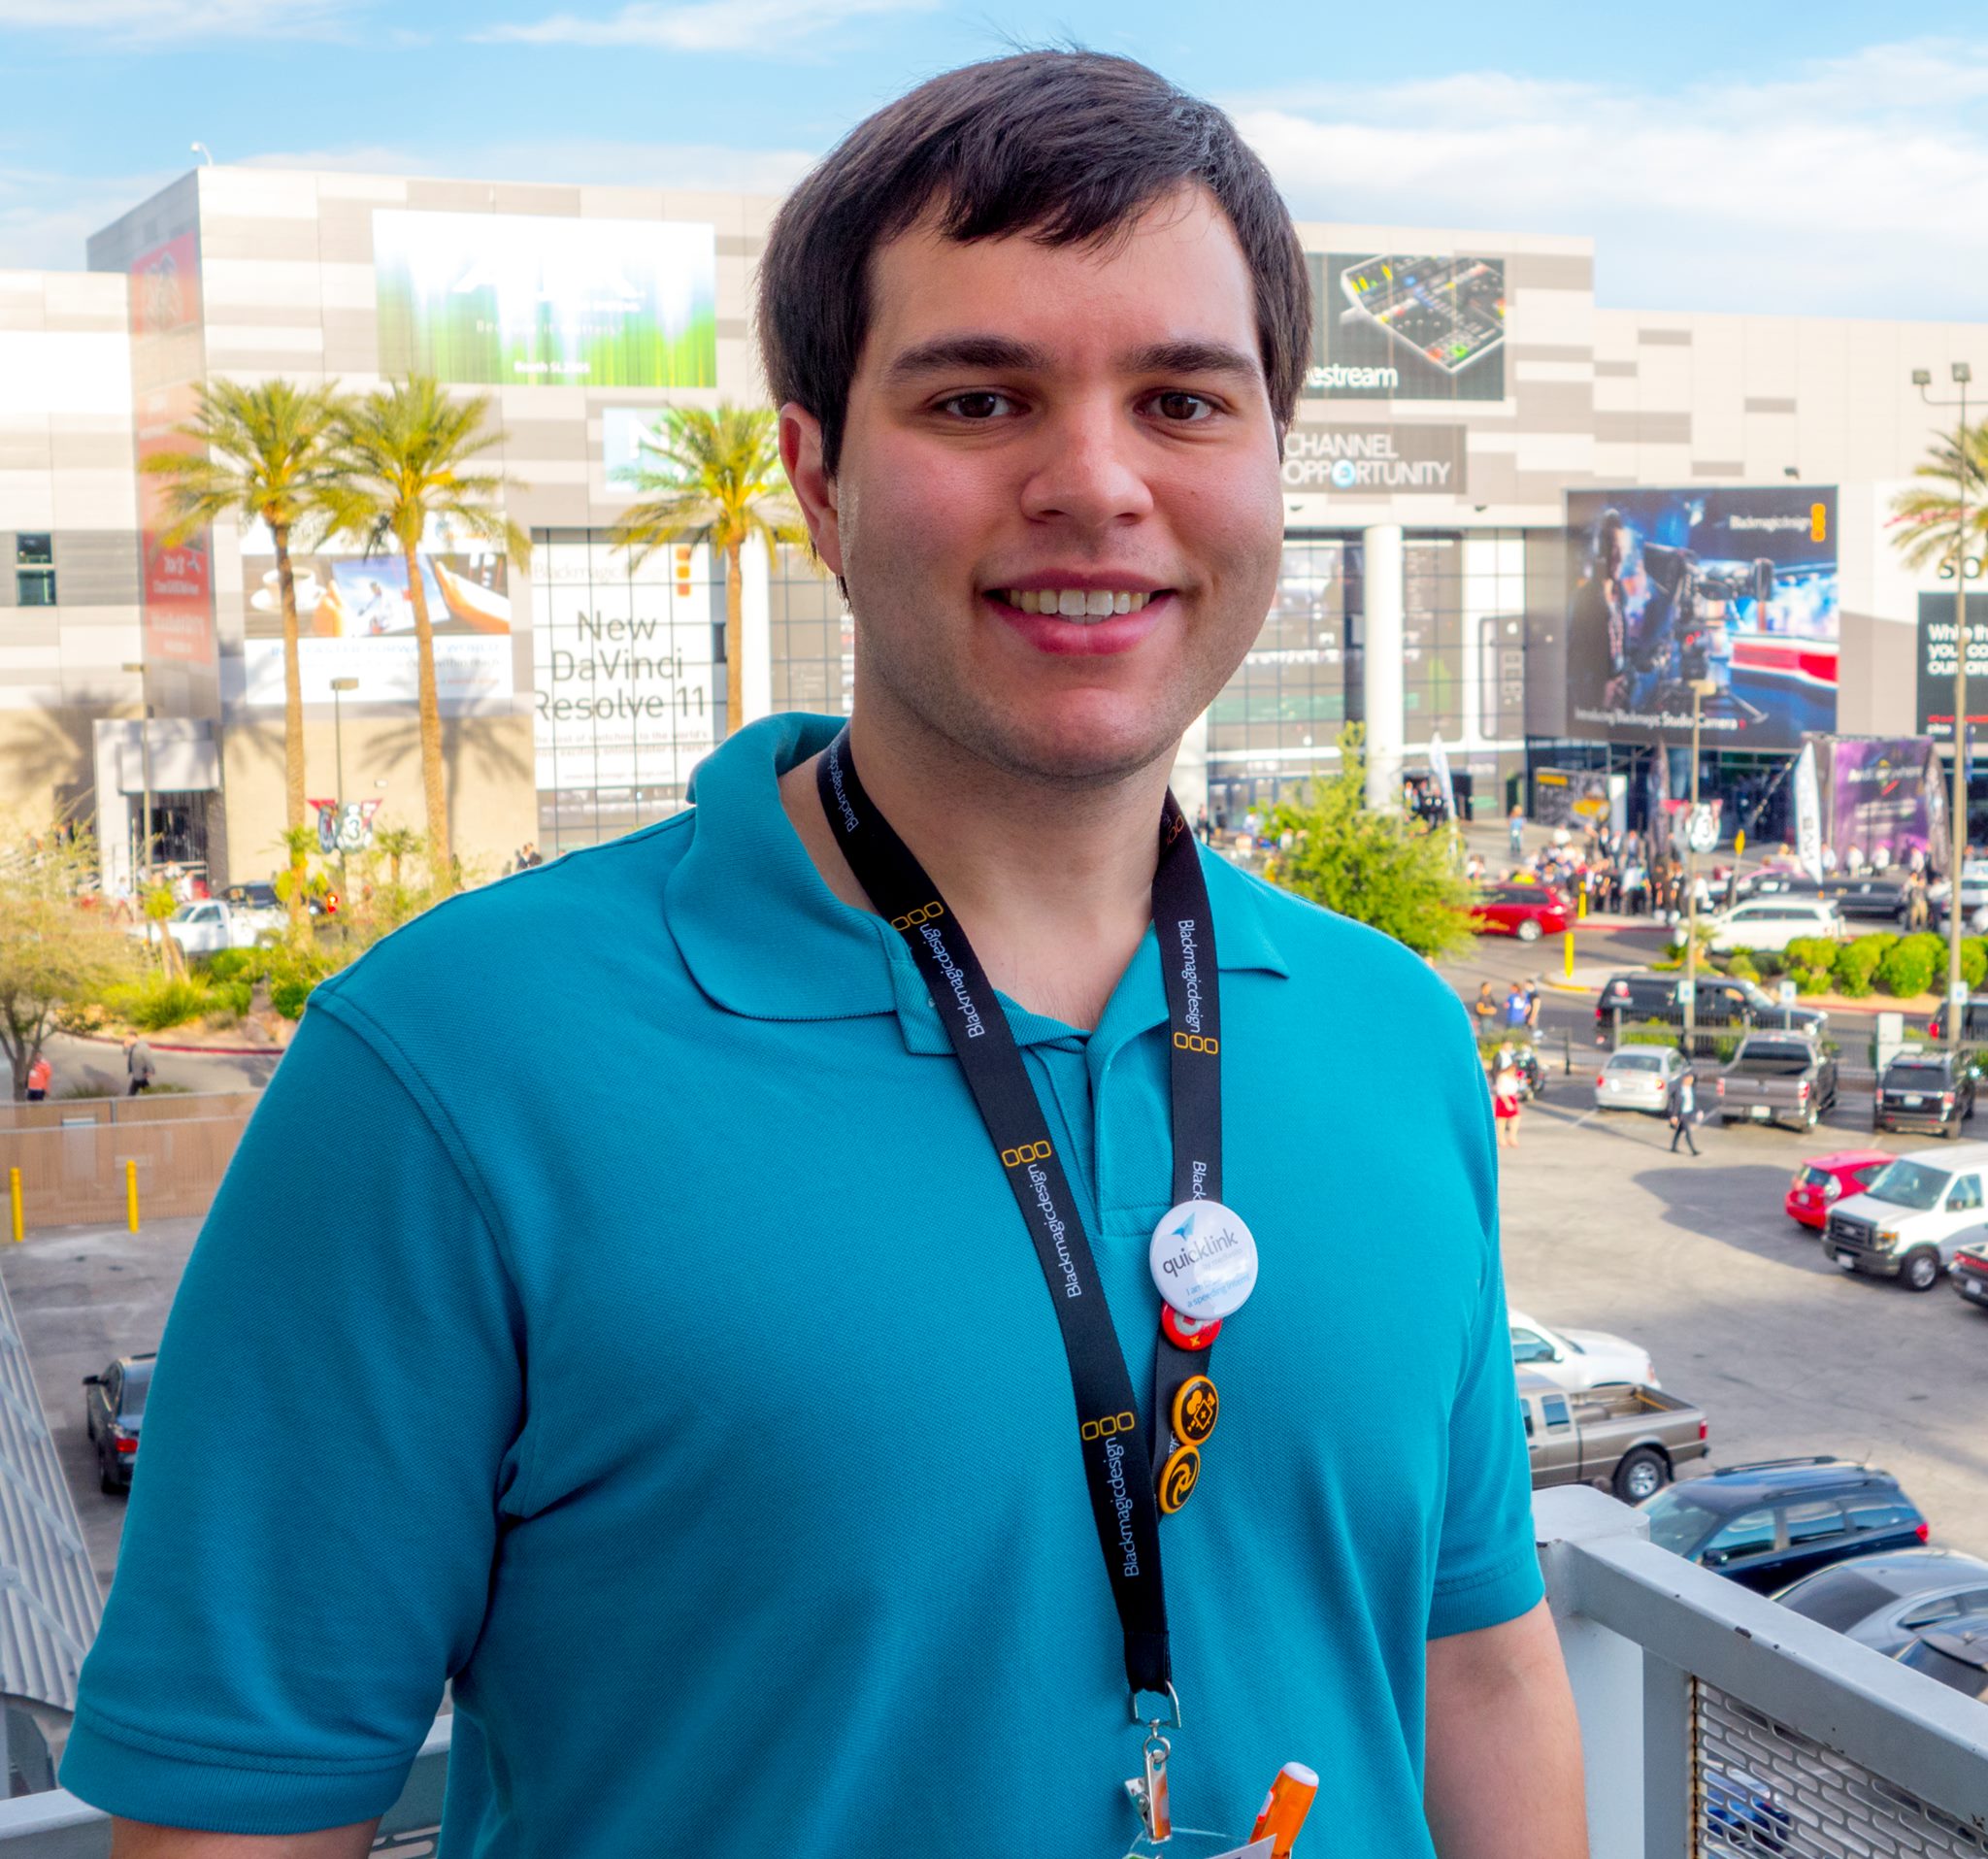 Zack Birlew at the NAB Convention in Las Vegas 2014.